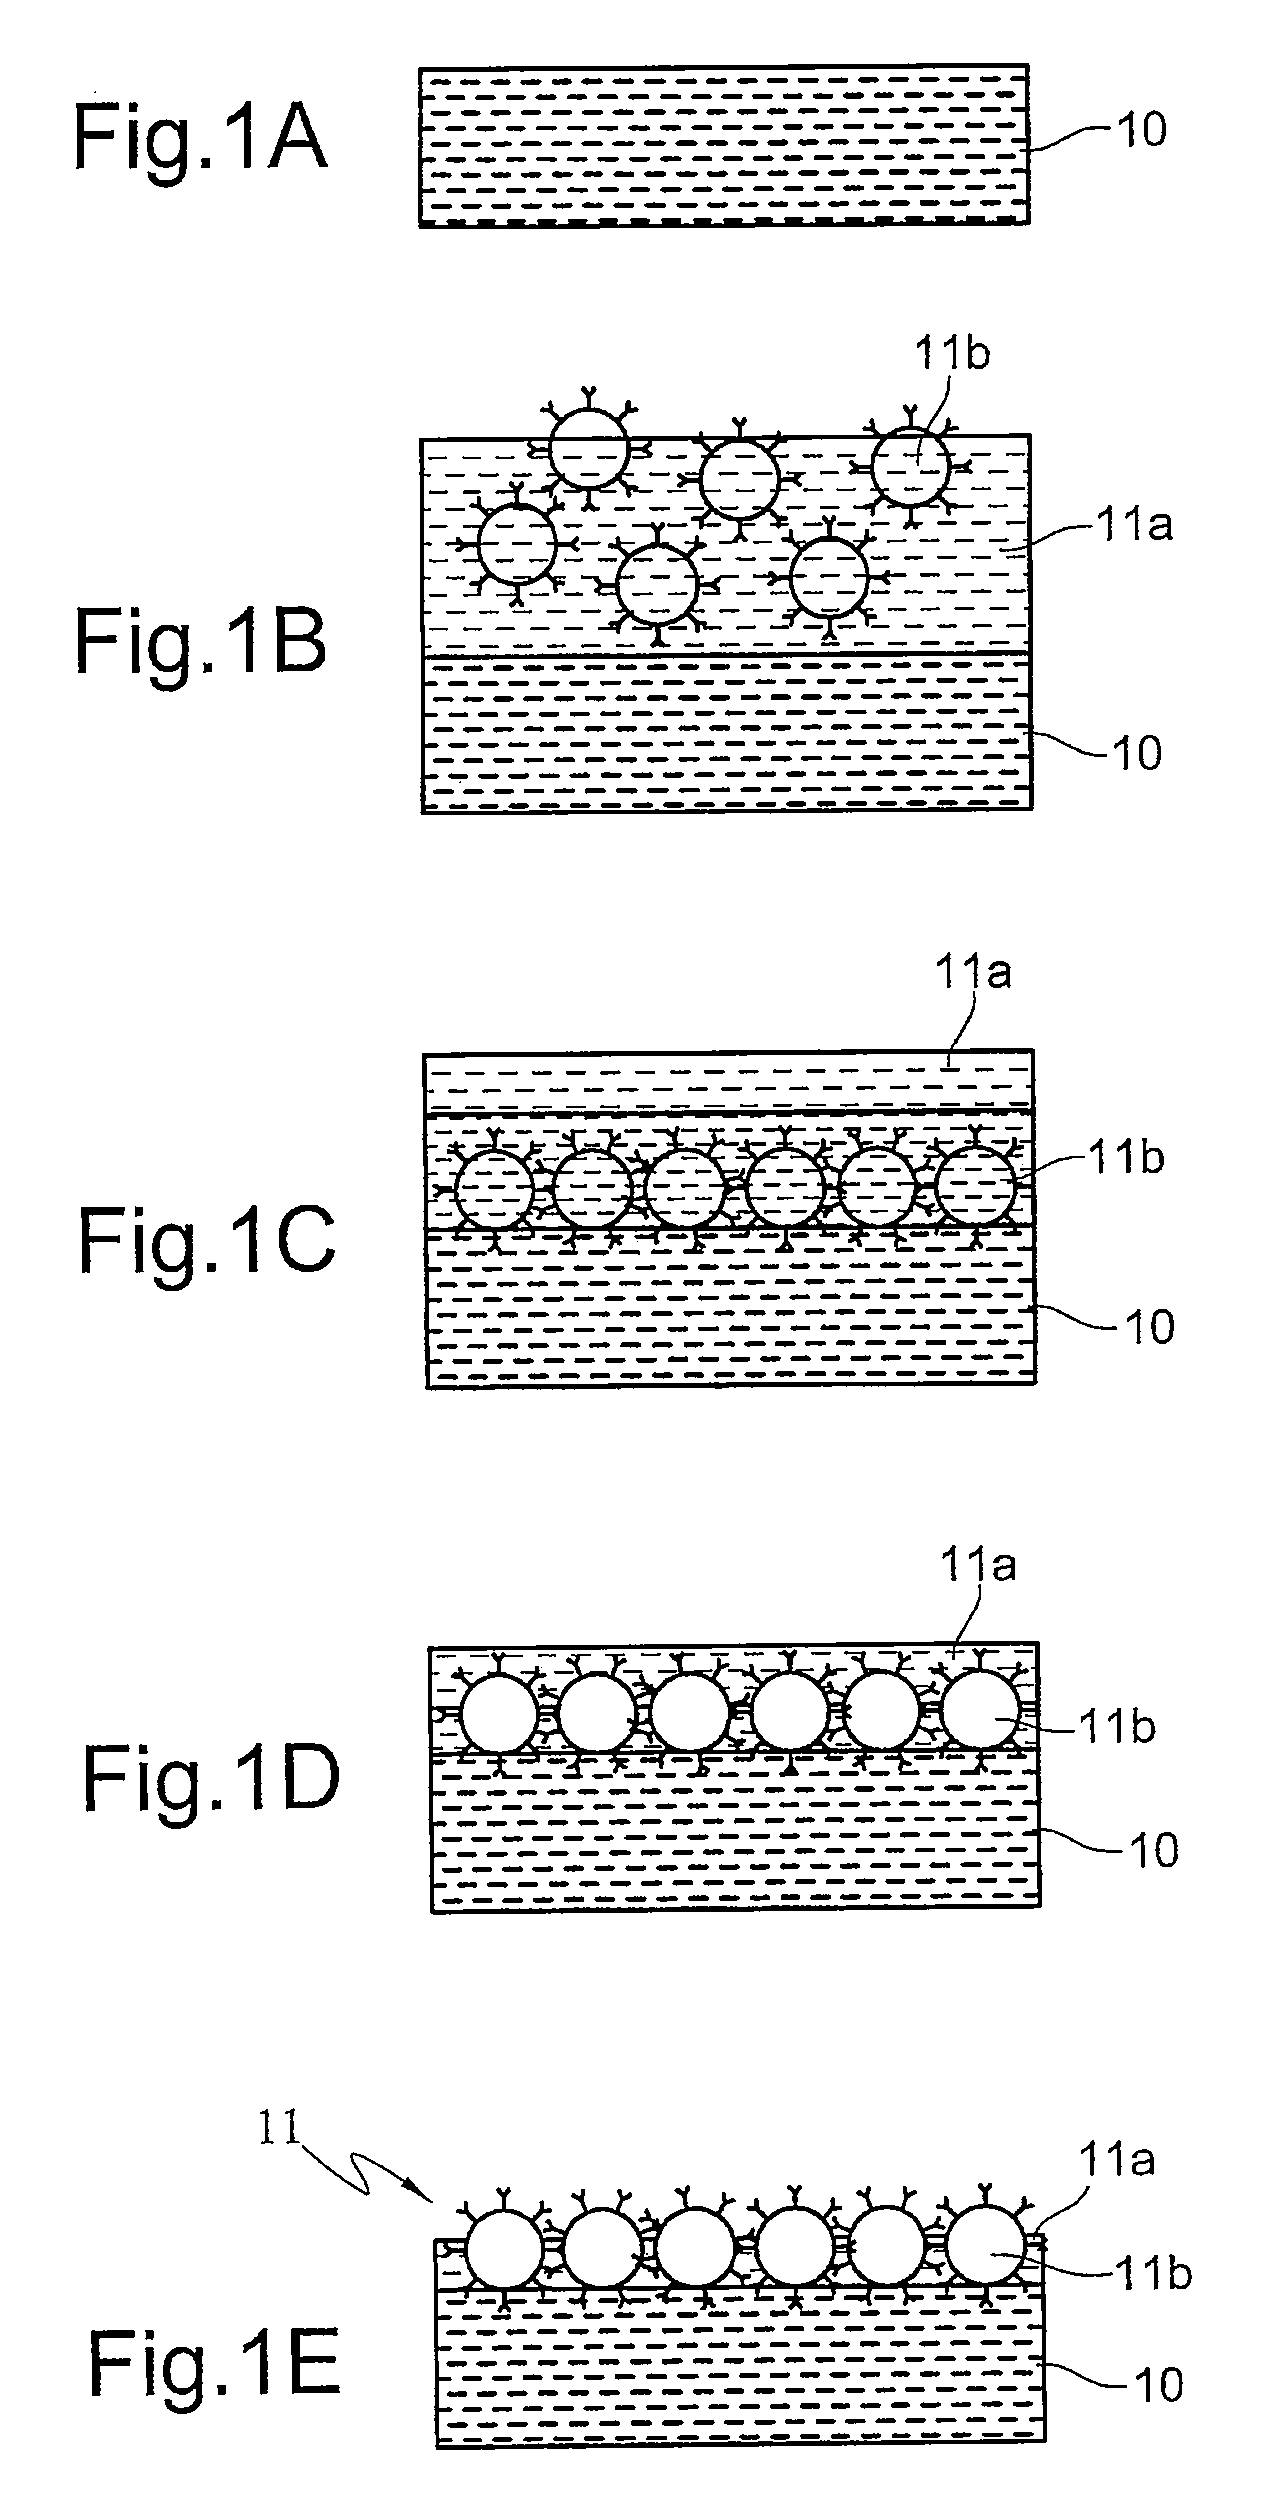 Method for formation of a stationary phase in an immunoadsorption wall